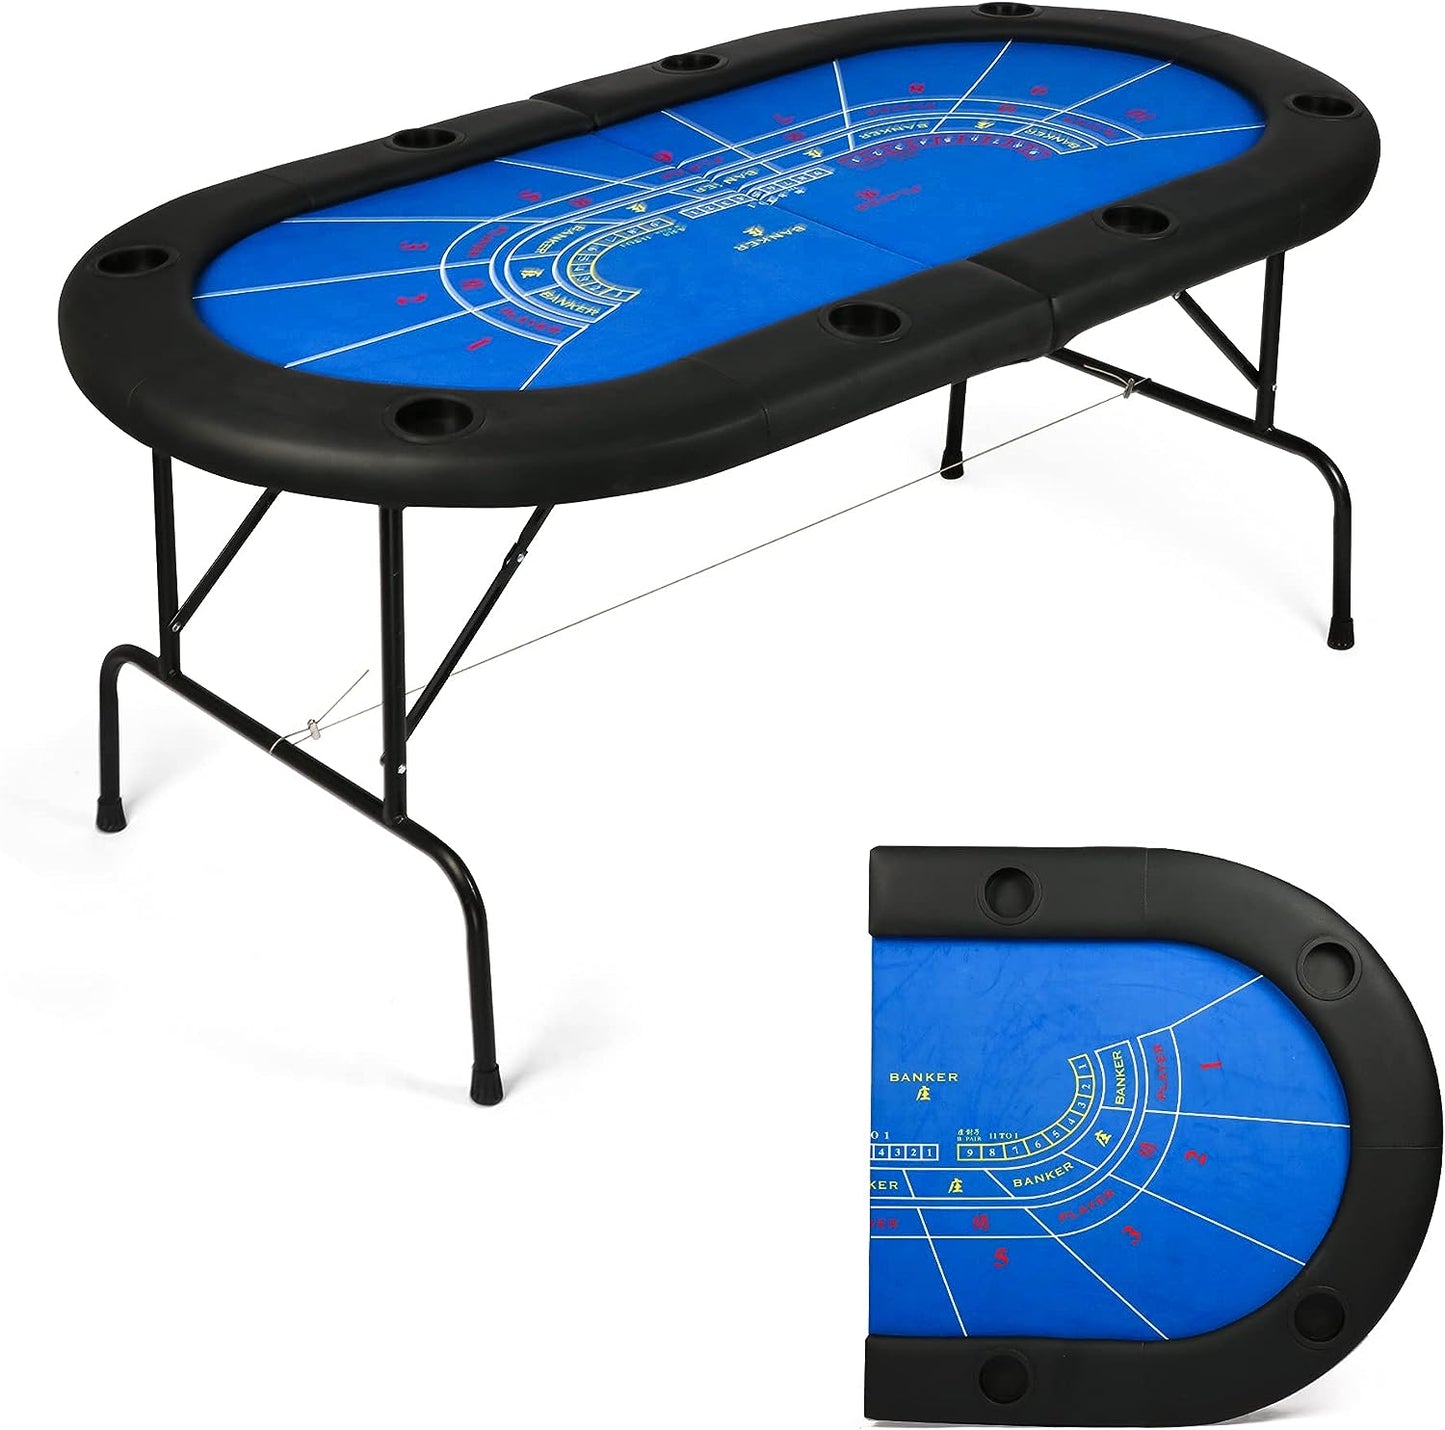 LUCKYERMORE 70.8" Folding Poker Table 8 Player with 8 Cup Holder for Texas Casino Leisure Game, Blue